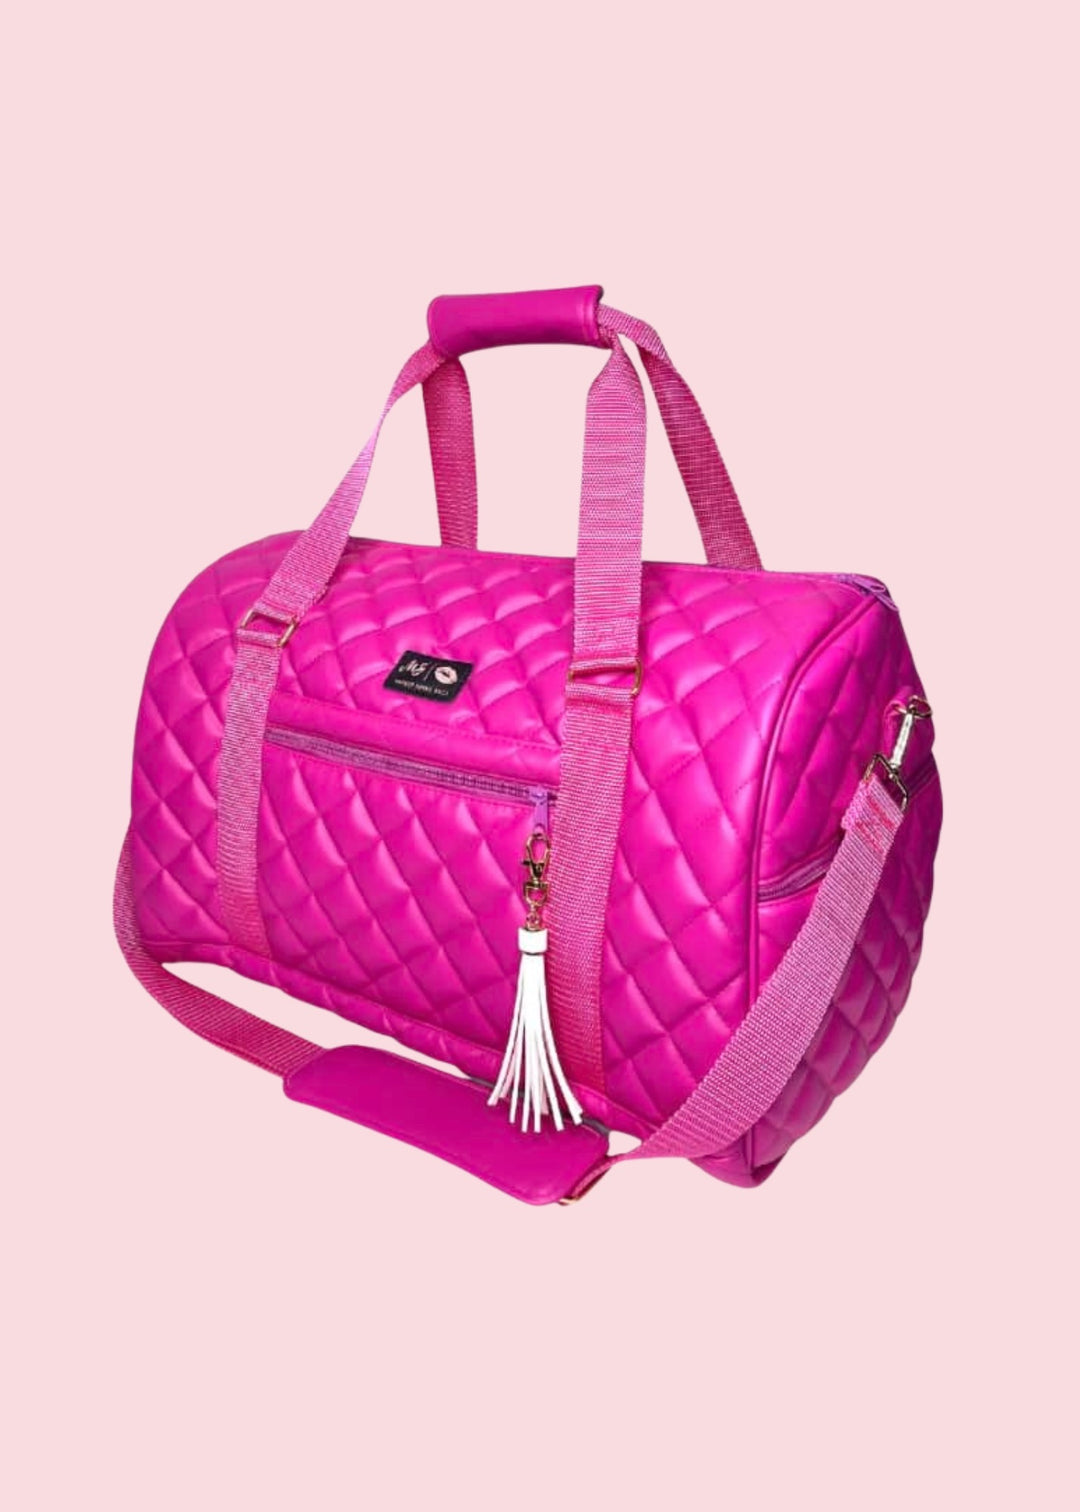 Makeup Junkie Bags - Luxe Hot Fuchsia Quilted Duffel Bag [Pre-Order]